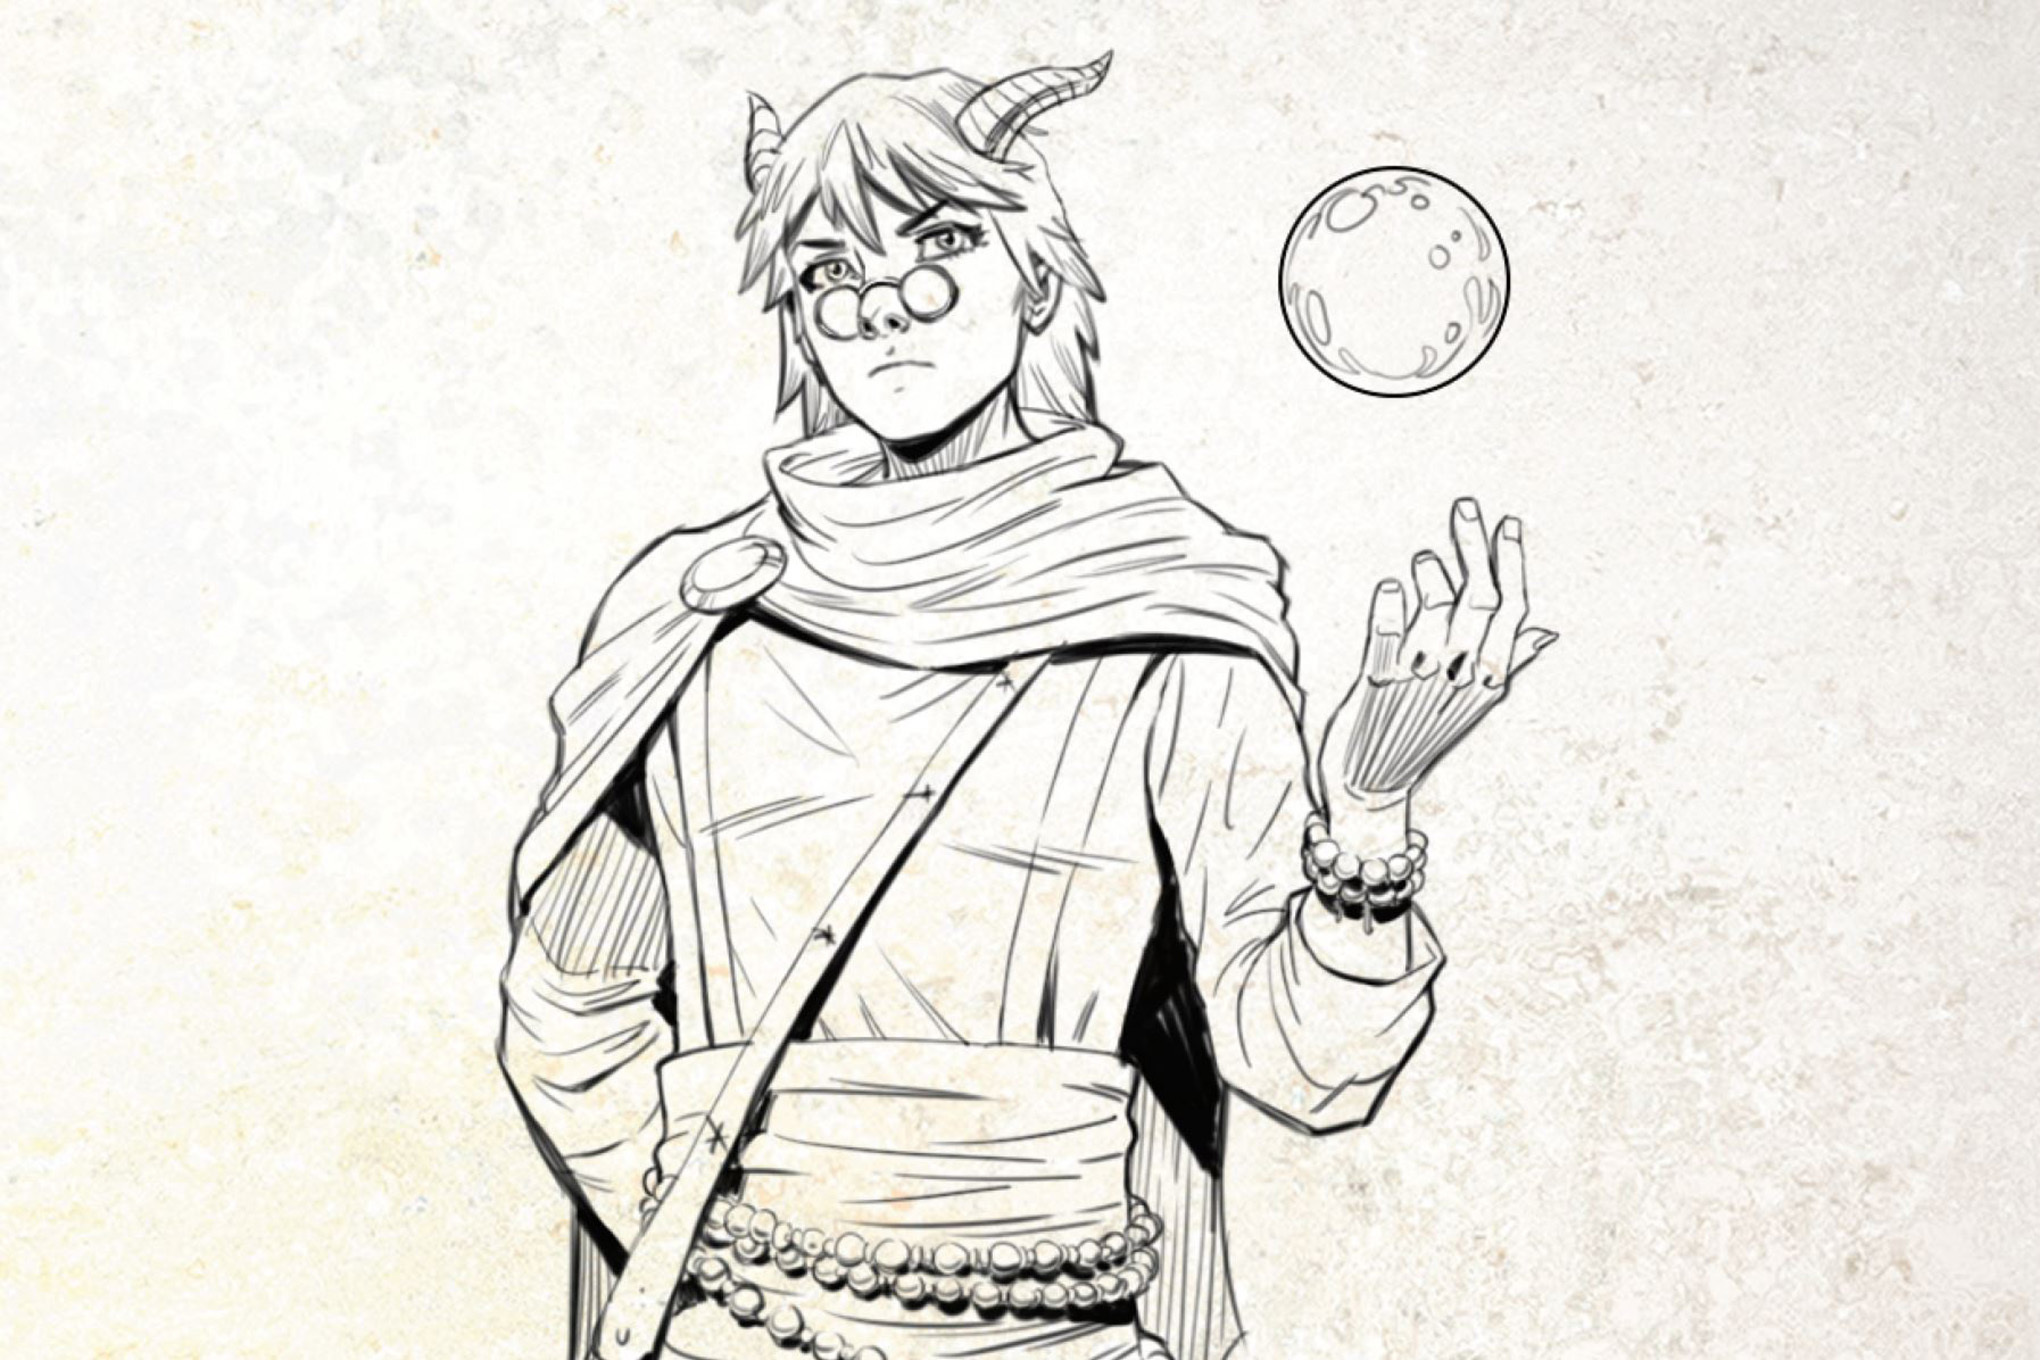 An androgynous D&amp;D character, with the horns of a tiefling and the aquiline features of an elf, tossed a crystal ball in one hand.